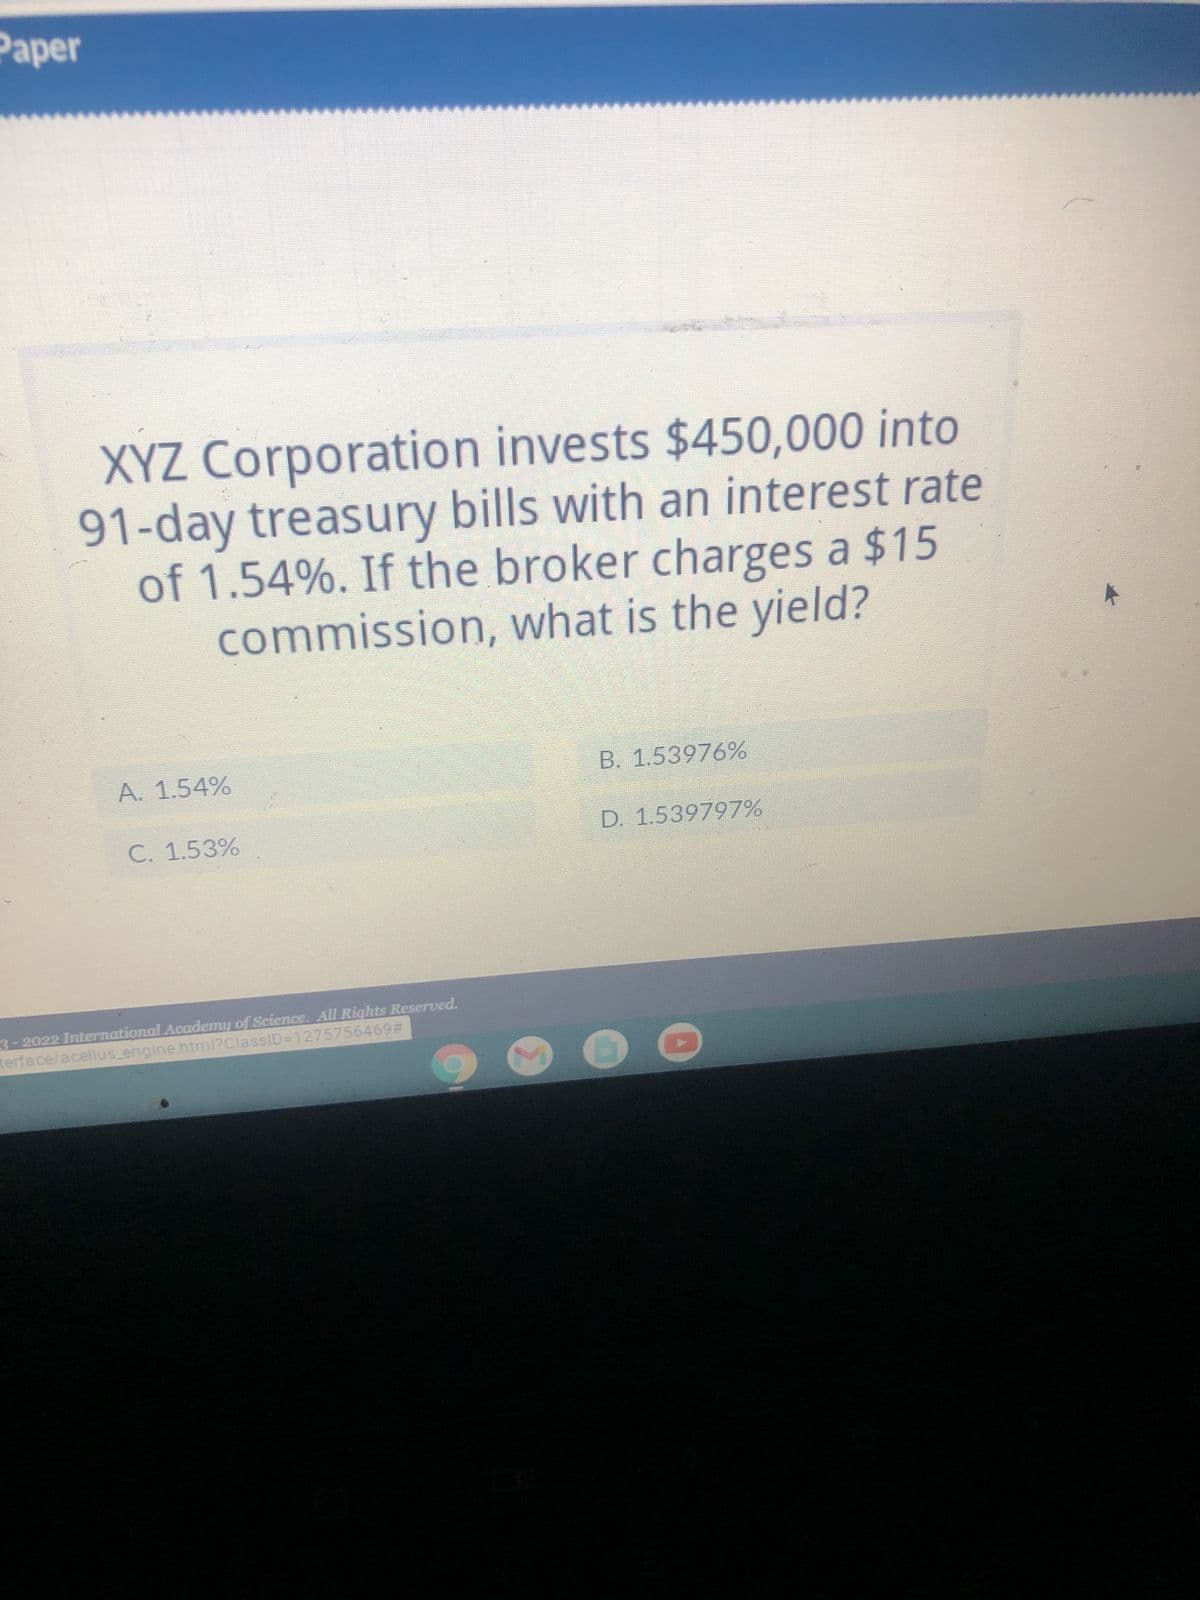 Paper
XYZ Corporation invests $450,000 into
91-day treasury bills with an interest rate
of 1.54%. If the broker charges a $15
commission, what is the yield?
A. 1.54%
C. 1.53%
3-2022 International Academy of Science. All Rights Reserved.
terface/acellus_engine.html?ClassID=1275756469#
B. 1.53976%
D. 1.539797%